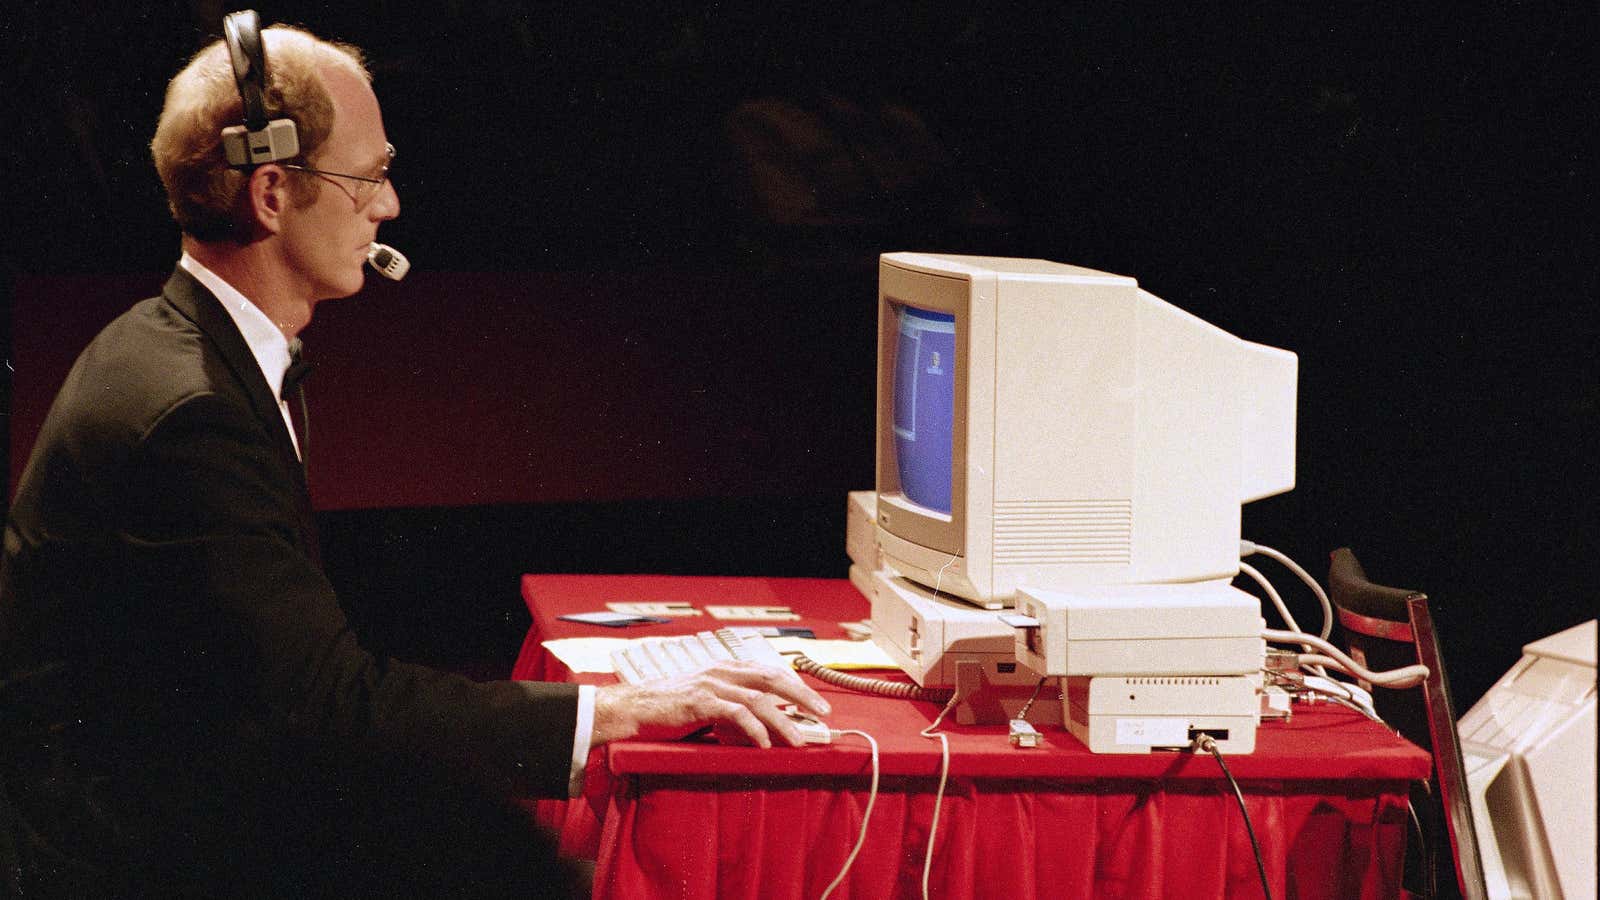 In New York at Lincoln Center commodore “Amiga” computers debuted their new computer photo shows operator running programs on “Amiga” during presentation show on July…